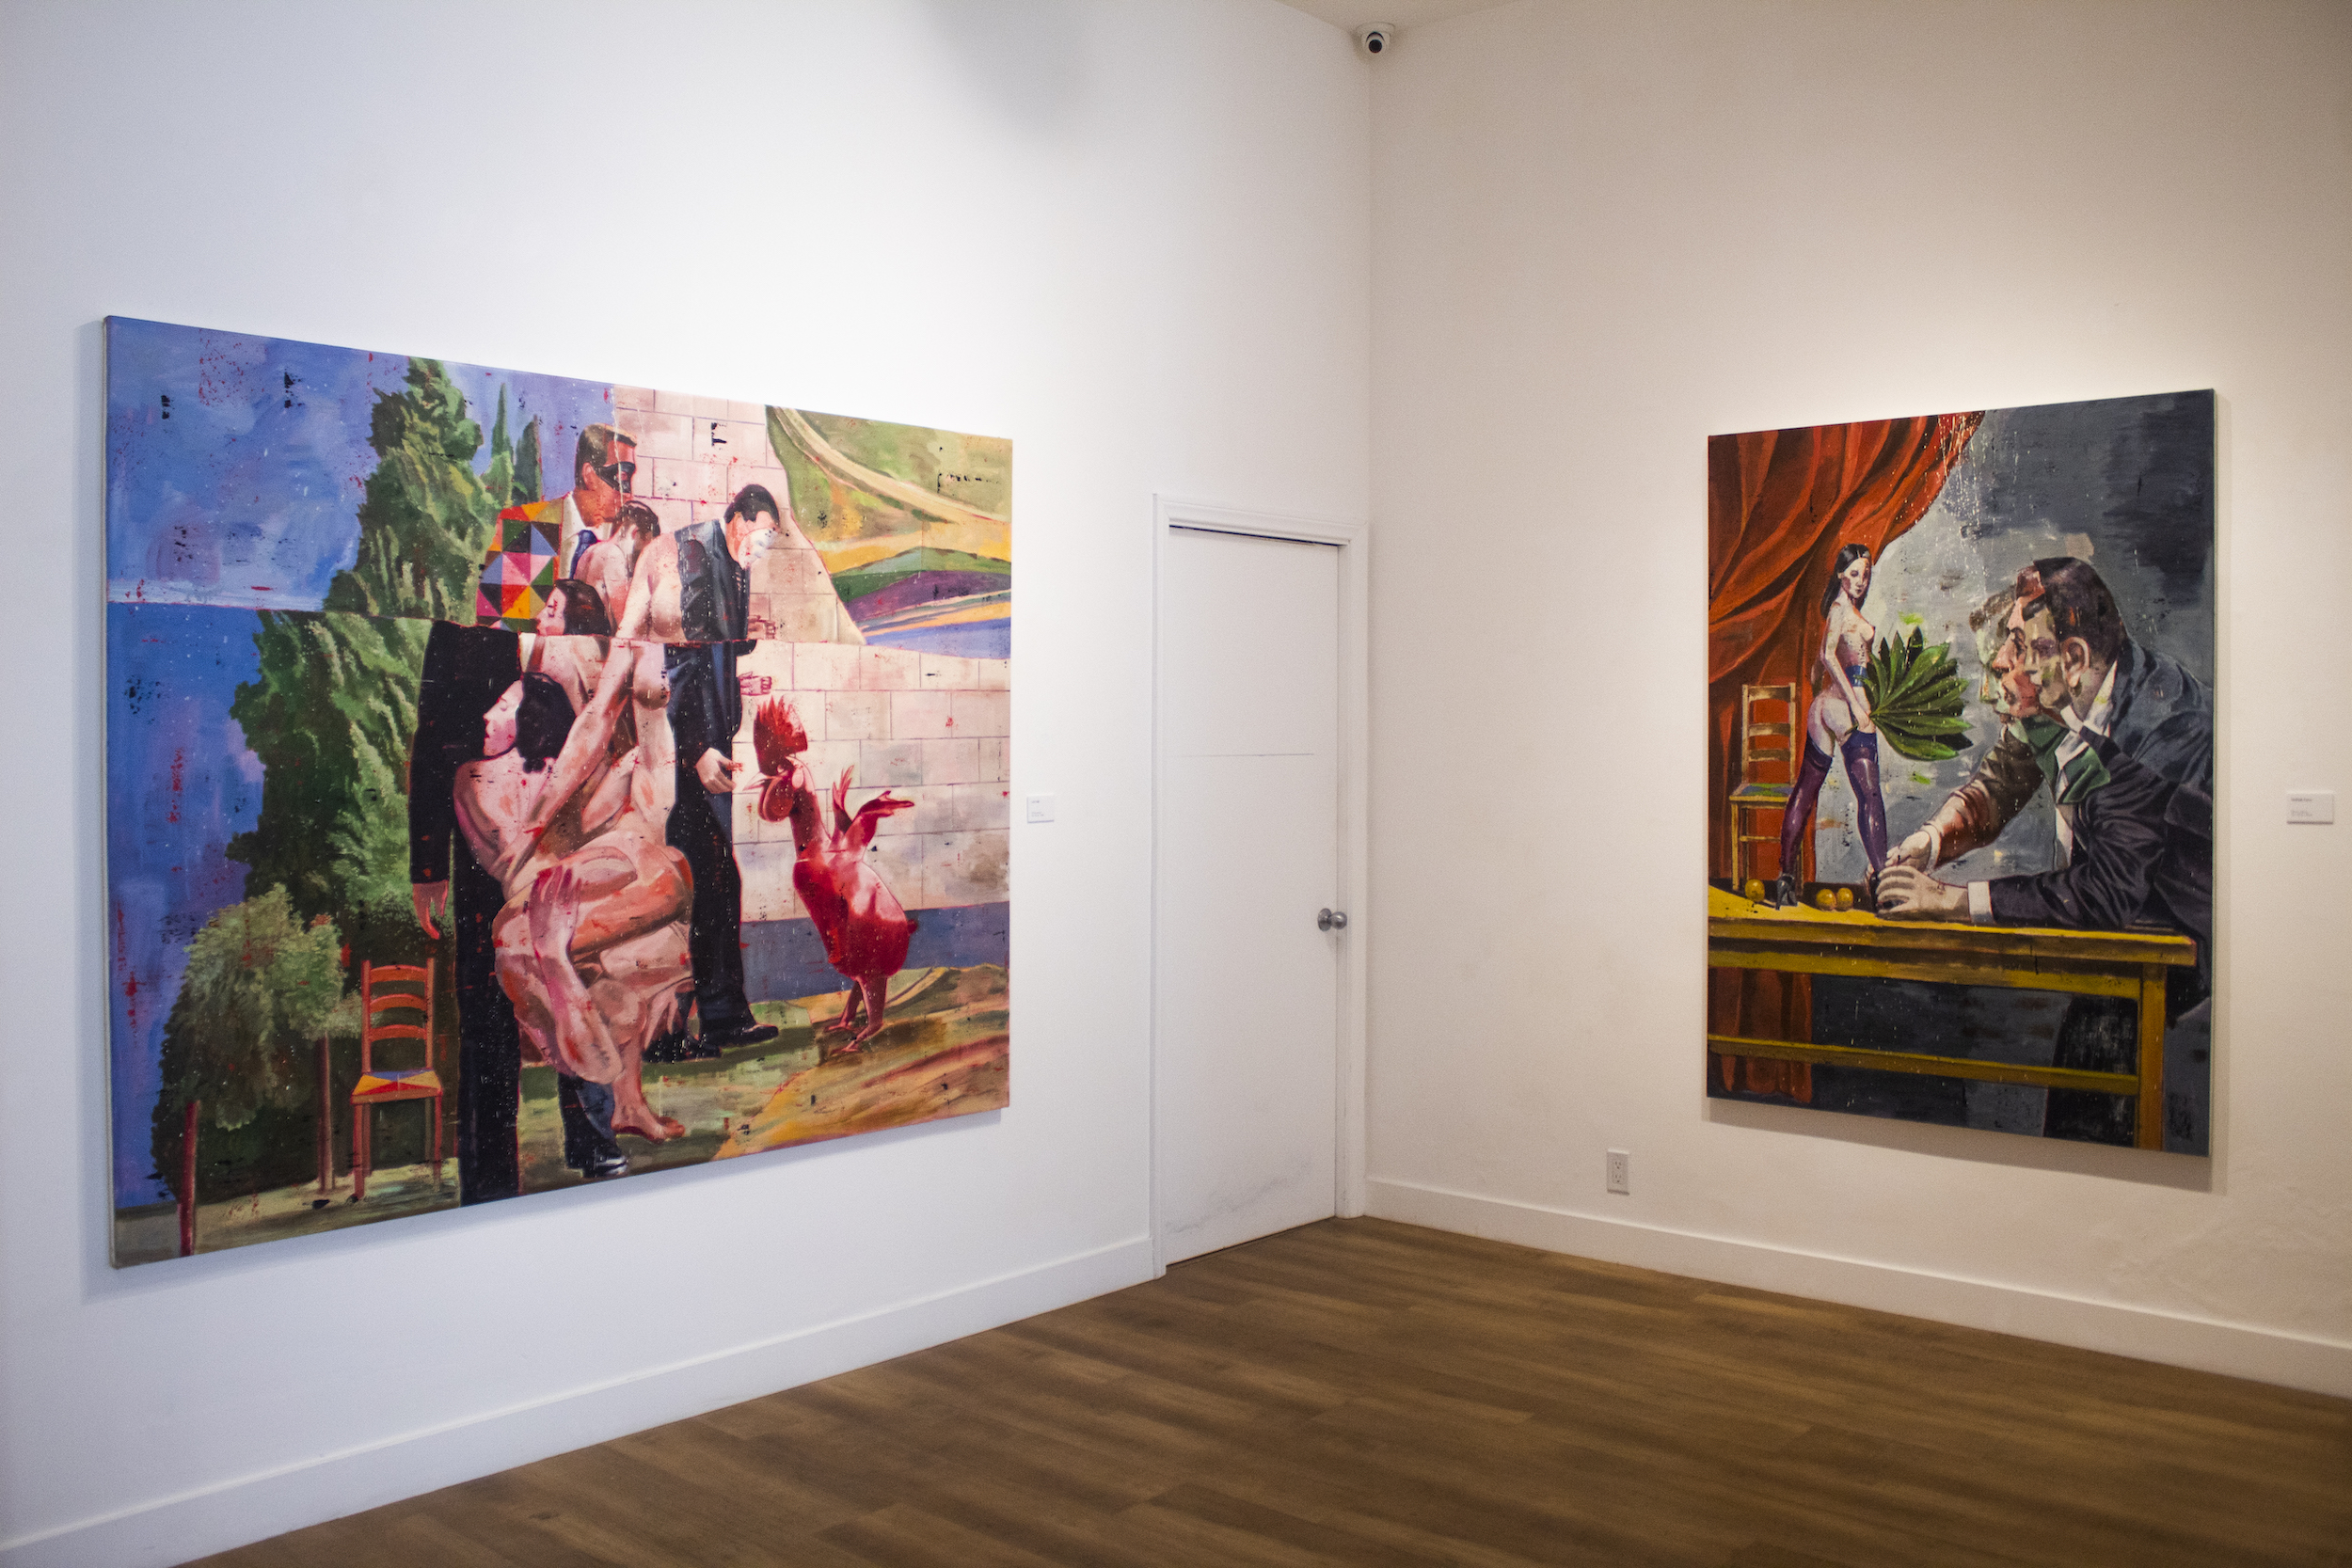 Installation shot of "Let's Talk" and "Multiple Faces," from Nicky Nodjoumi's Los Angeles art exhibit at ADVOCARTSY